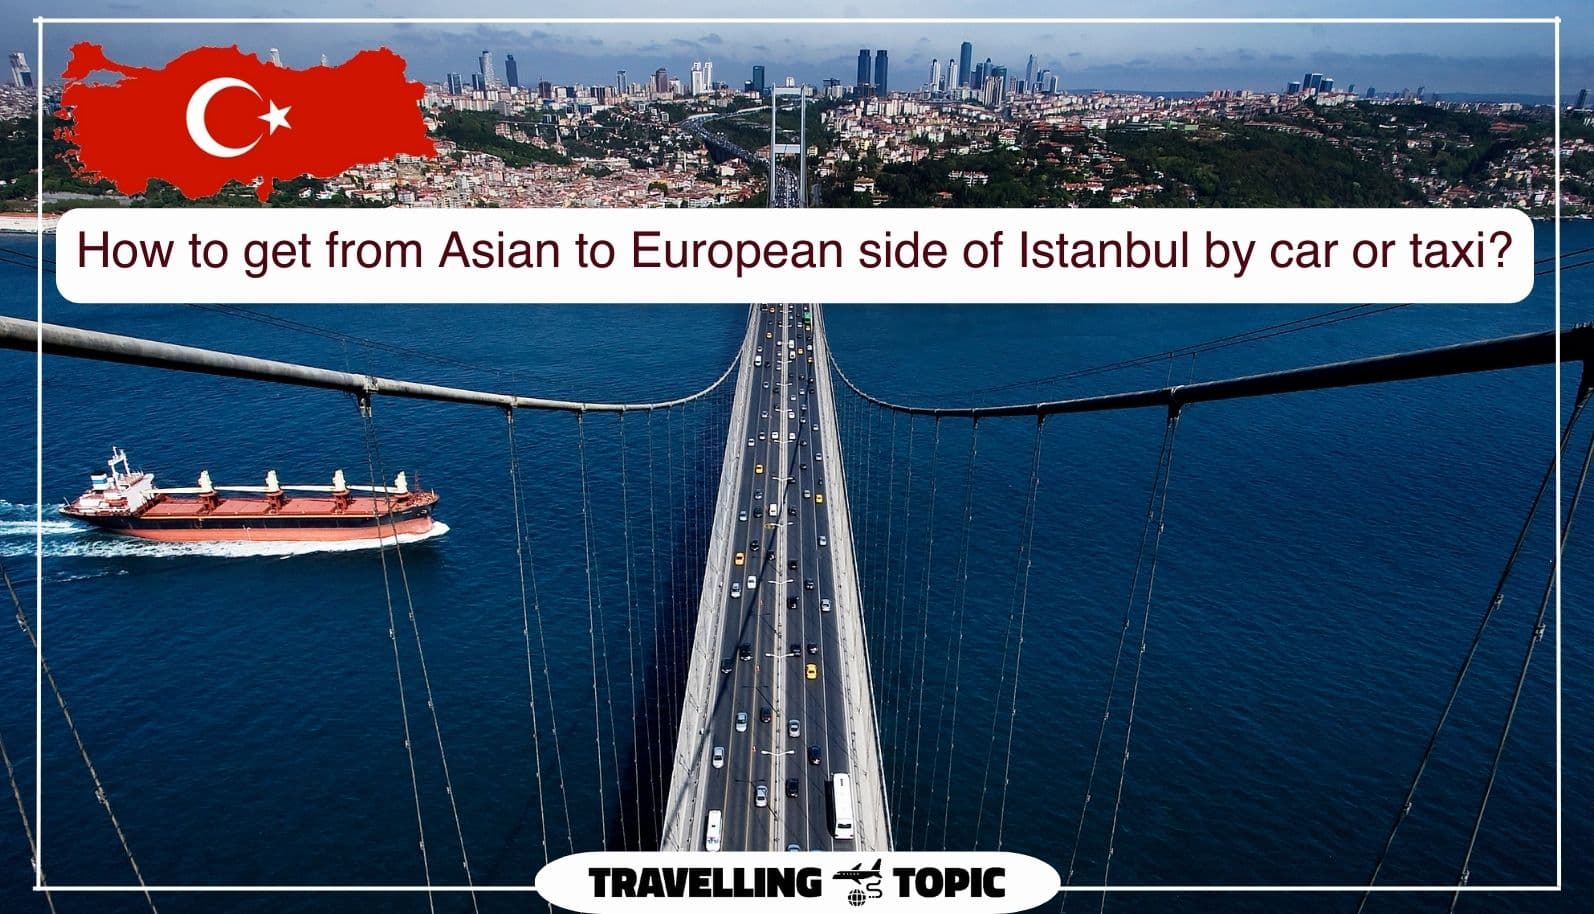 How to get from Asian to European side of Istanbul by car or taxi?